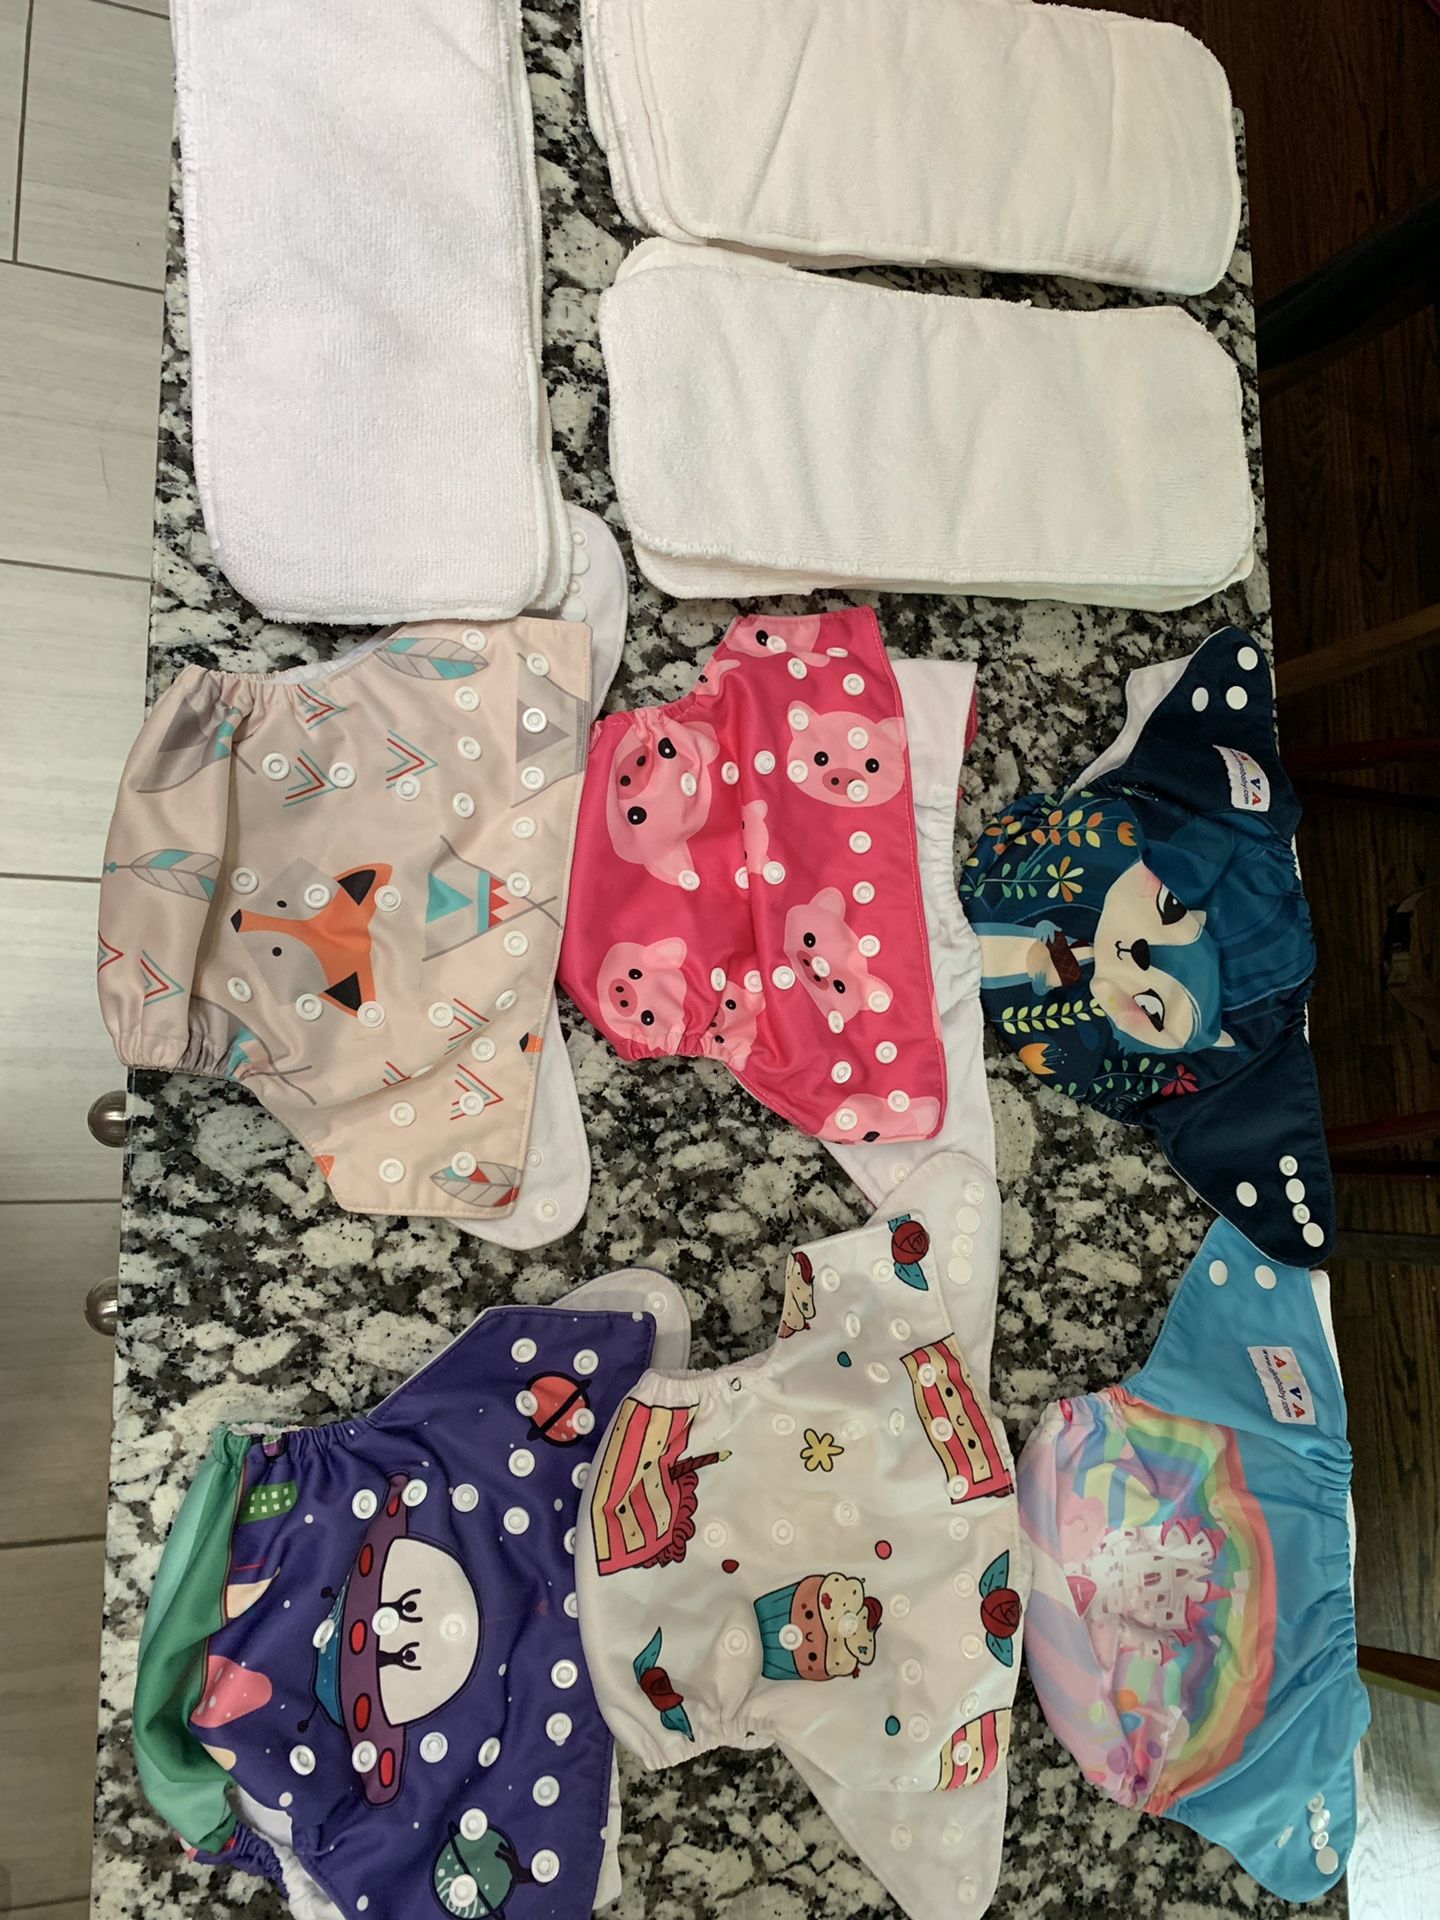 Cloth Diaper- Set of 6 Alva Baby printed cloth diaper (mix n match- choose 6 colors only) with 11 white insertsv